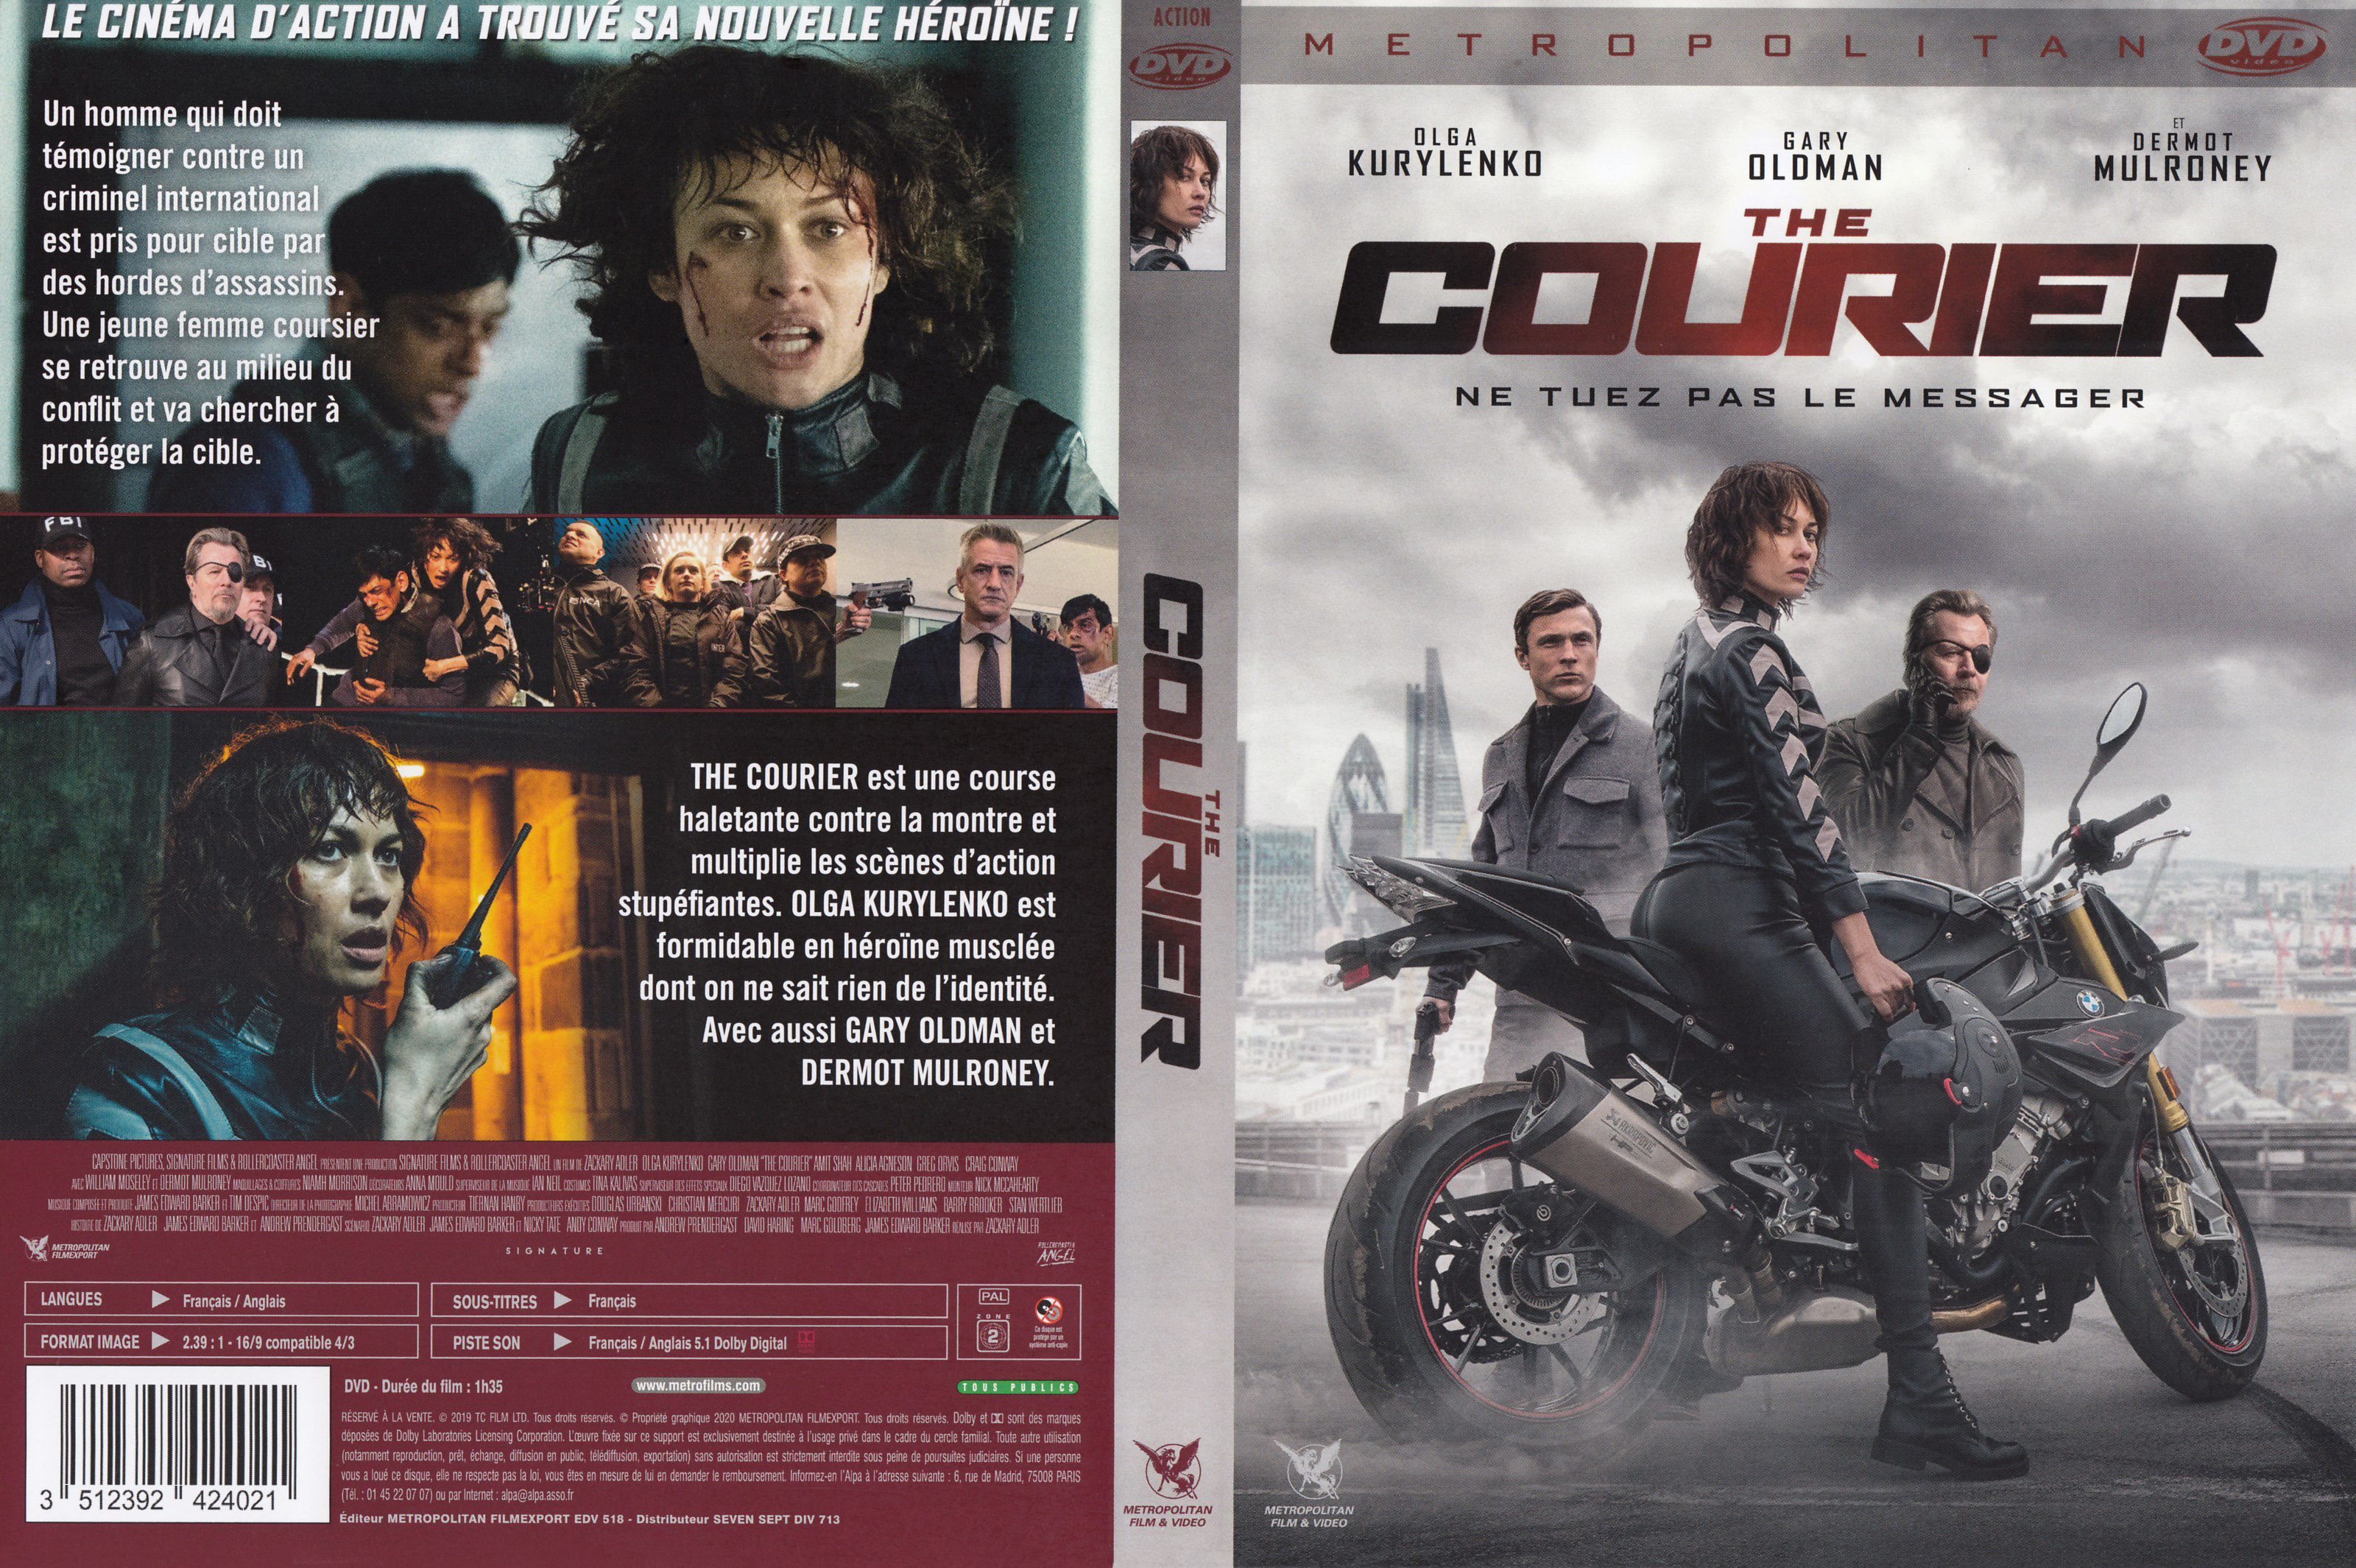 Jaquette DVD The courier